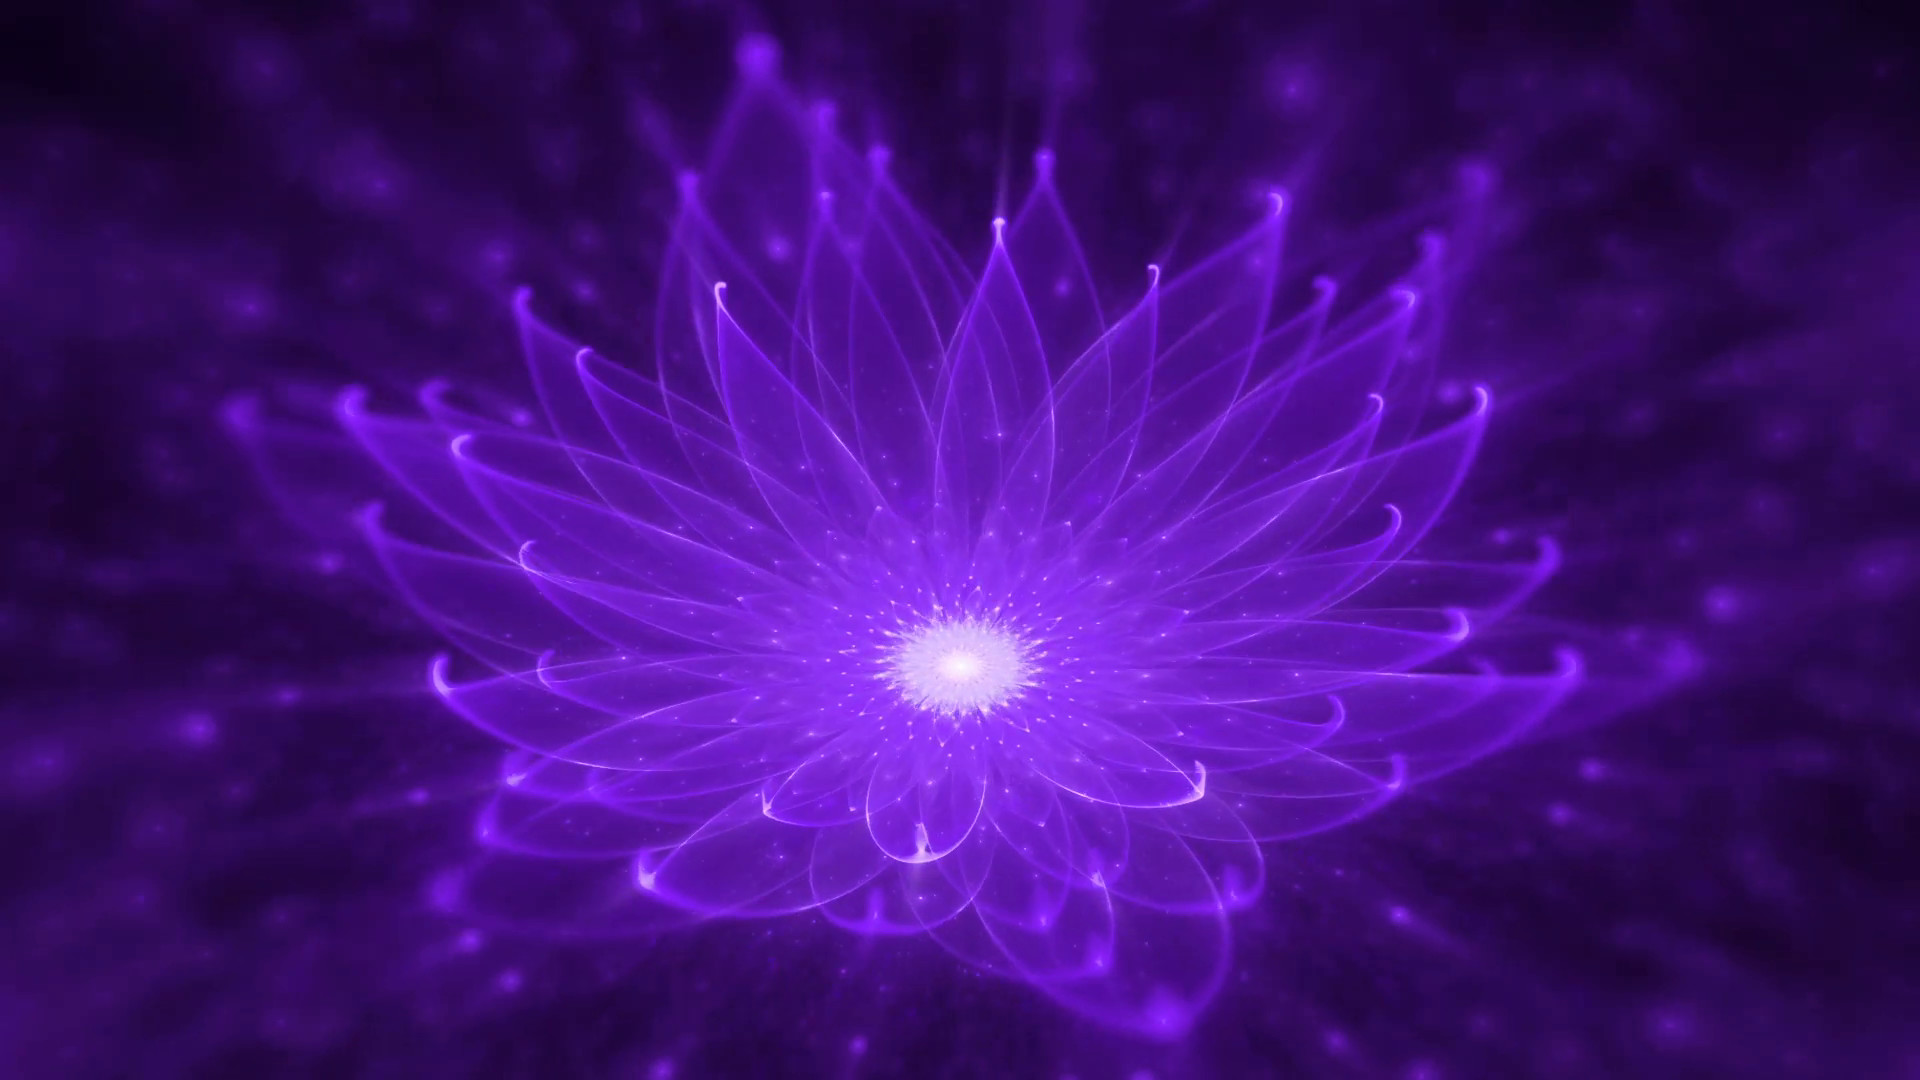 1920x1080 ... Magic scene - Space flower, purple and violet lotus, starry lights,  fairy dust, tranquil scene, serene motion on black background, animation,  30fps, ...